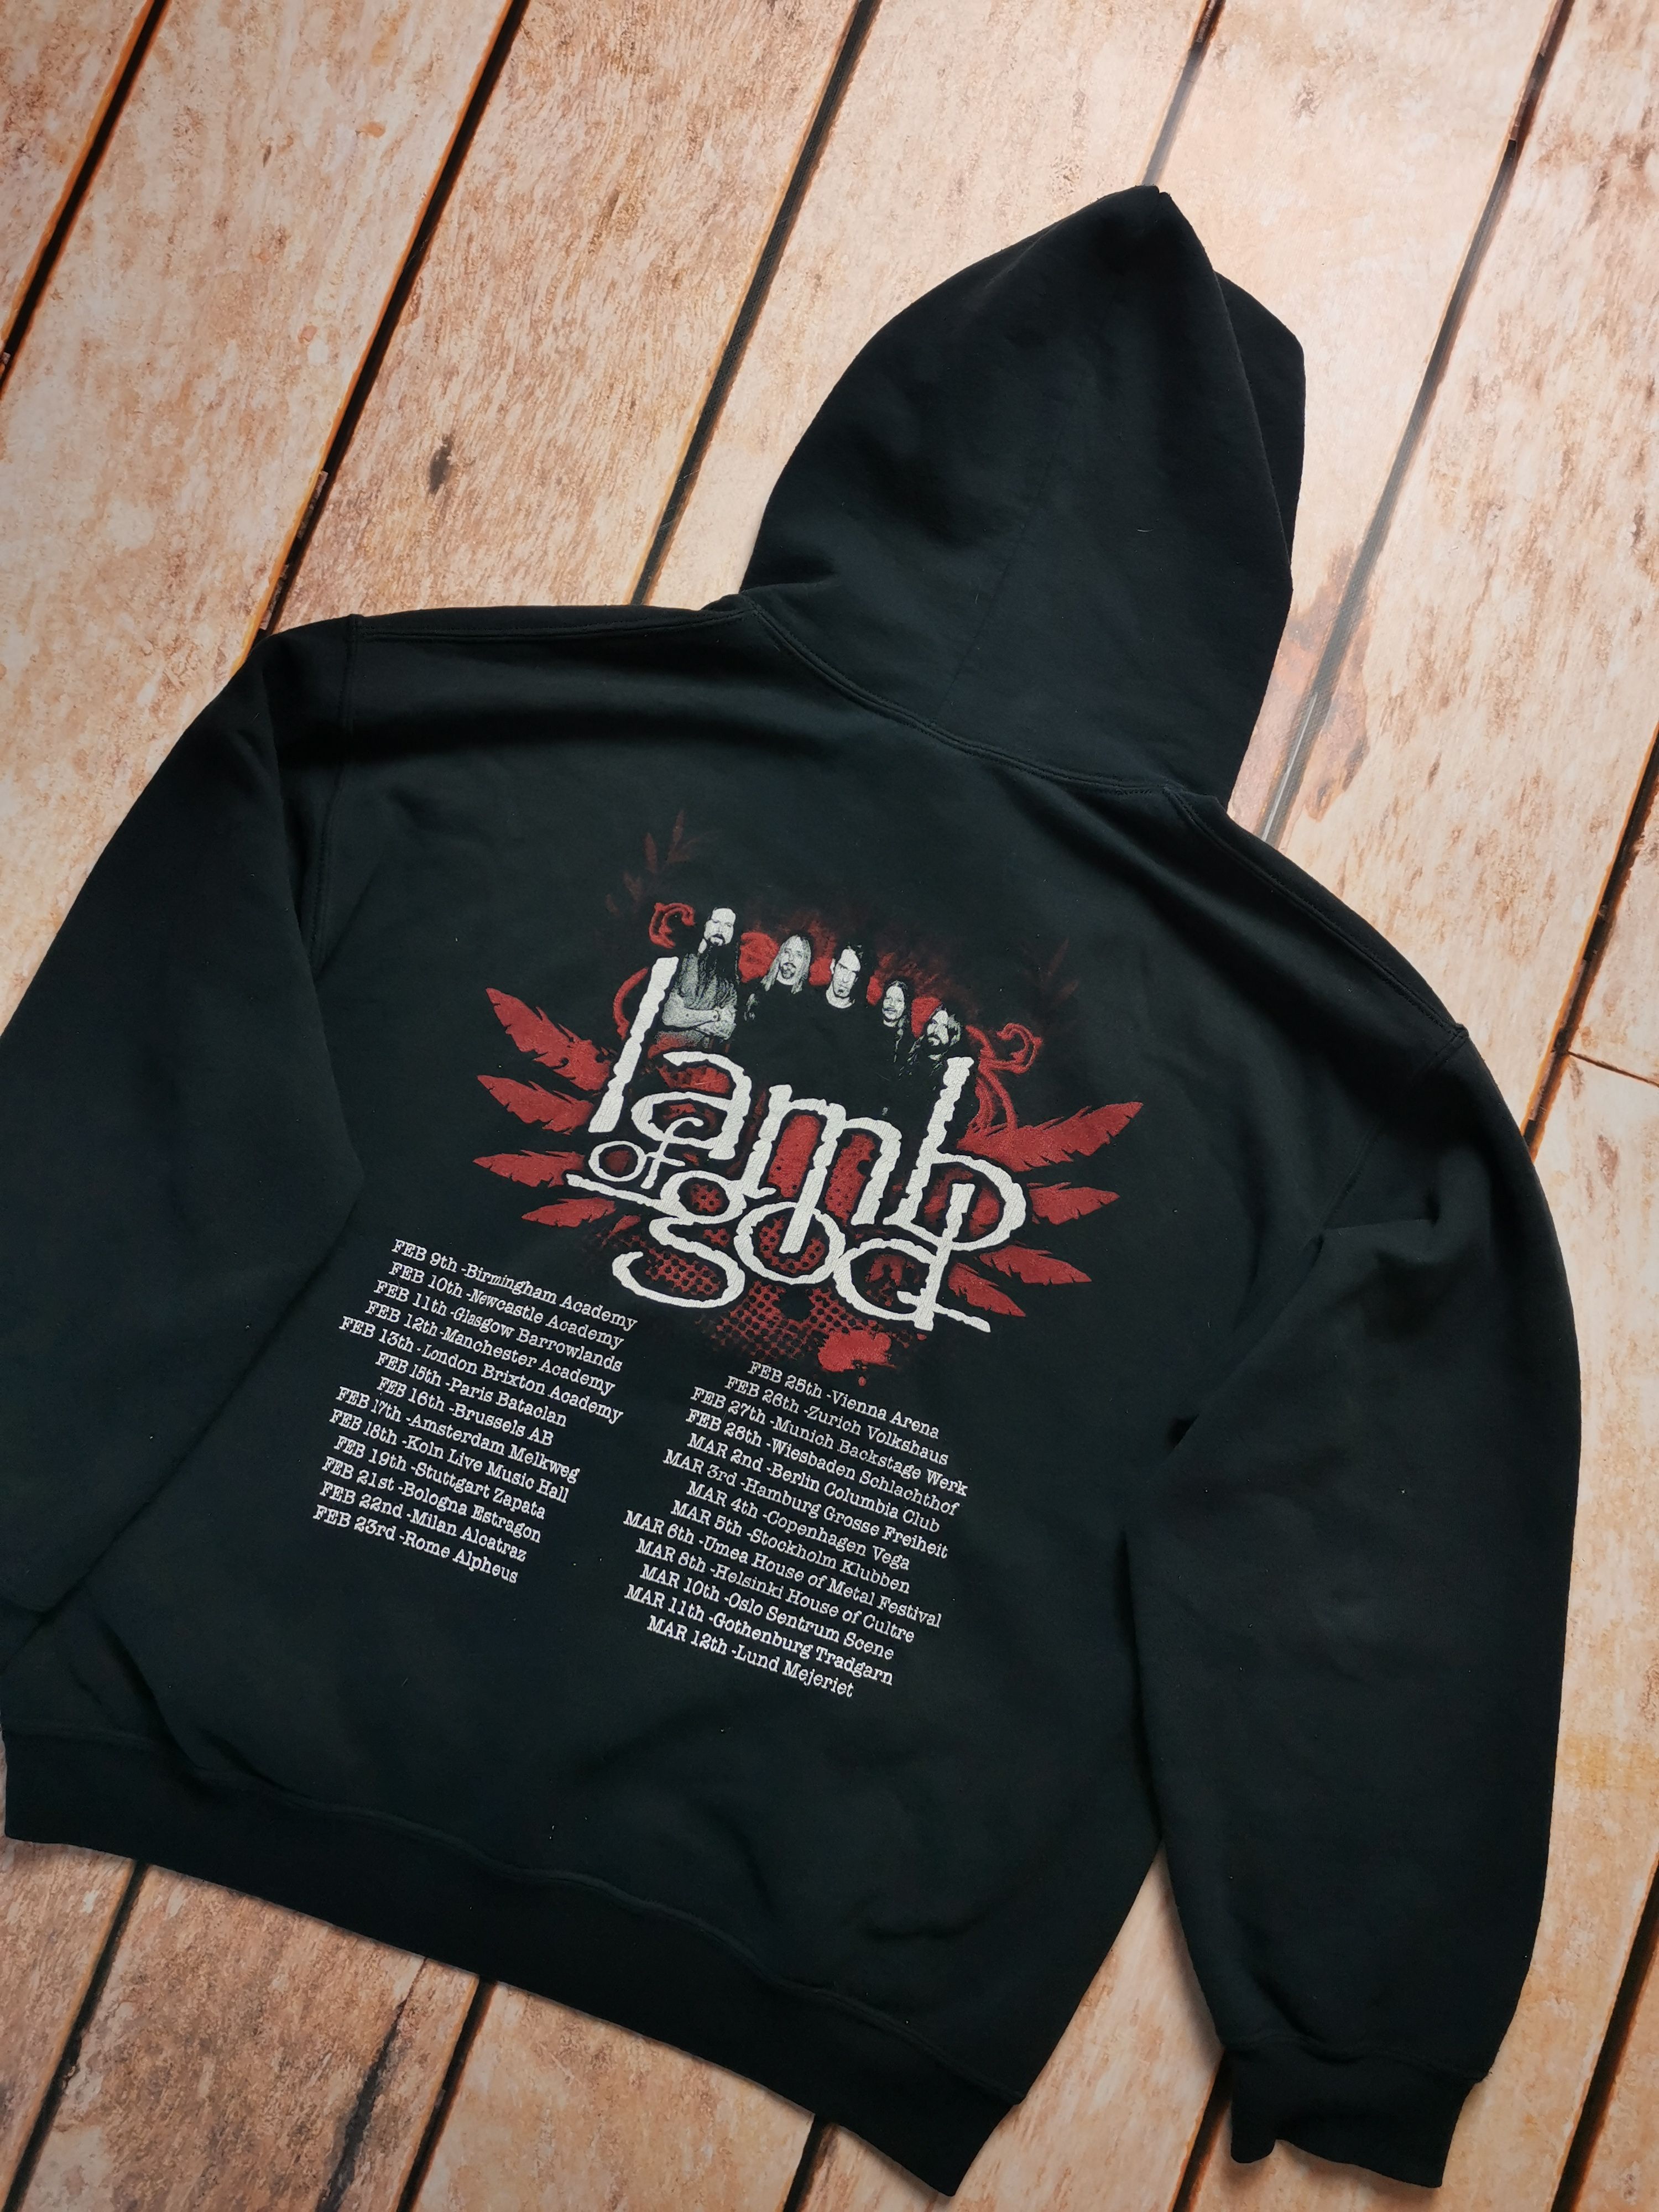 Gildan Band hoodie from the Lamb of God tour Size US M / EU 48-50 / 2 - 1 Preview